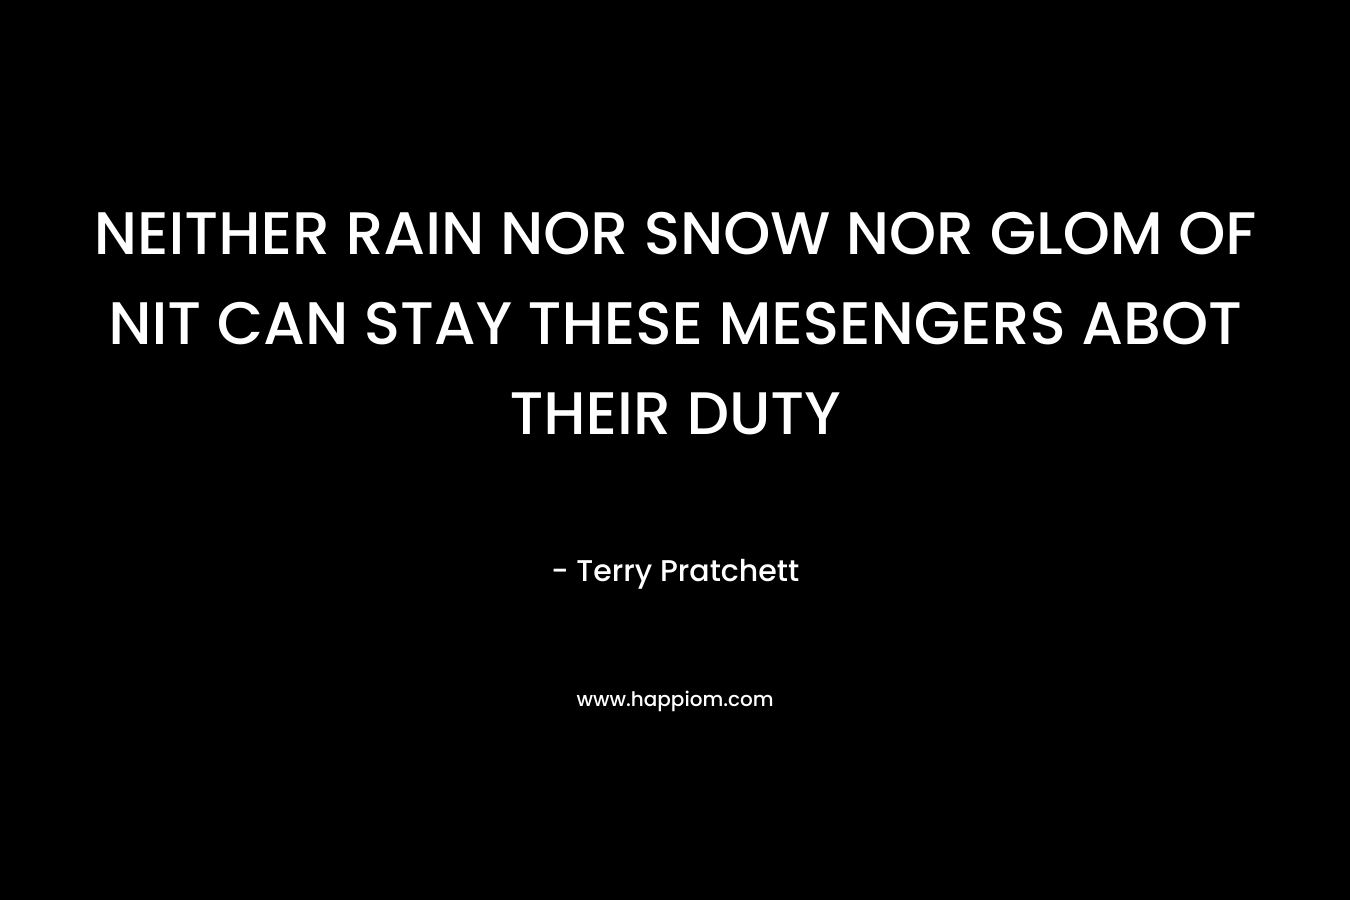 NEITHER RAIN NOR SNOW NOR GLOM OF NIT CAN STAY THESE MESENGERS ABOT THEIR DUTY – Terry Pratchett